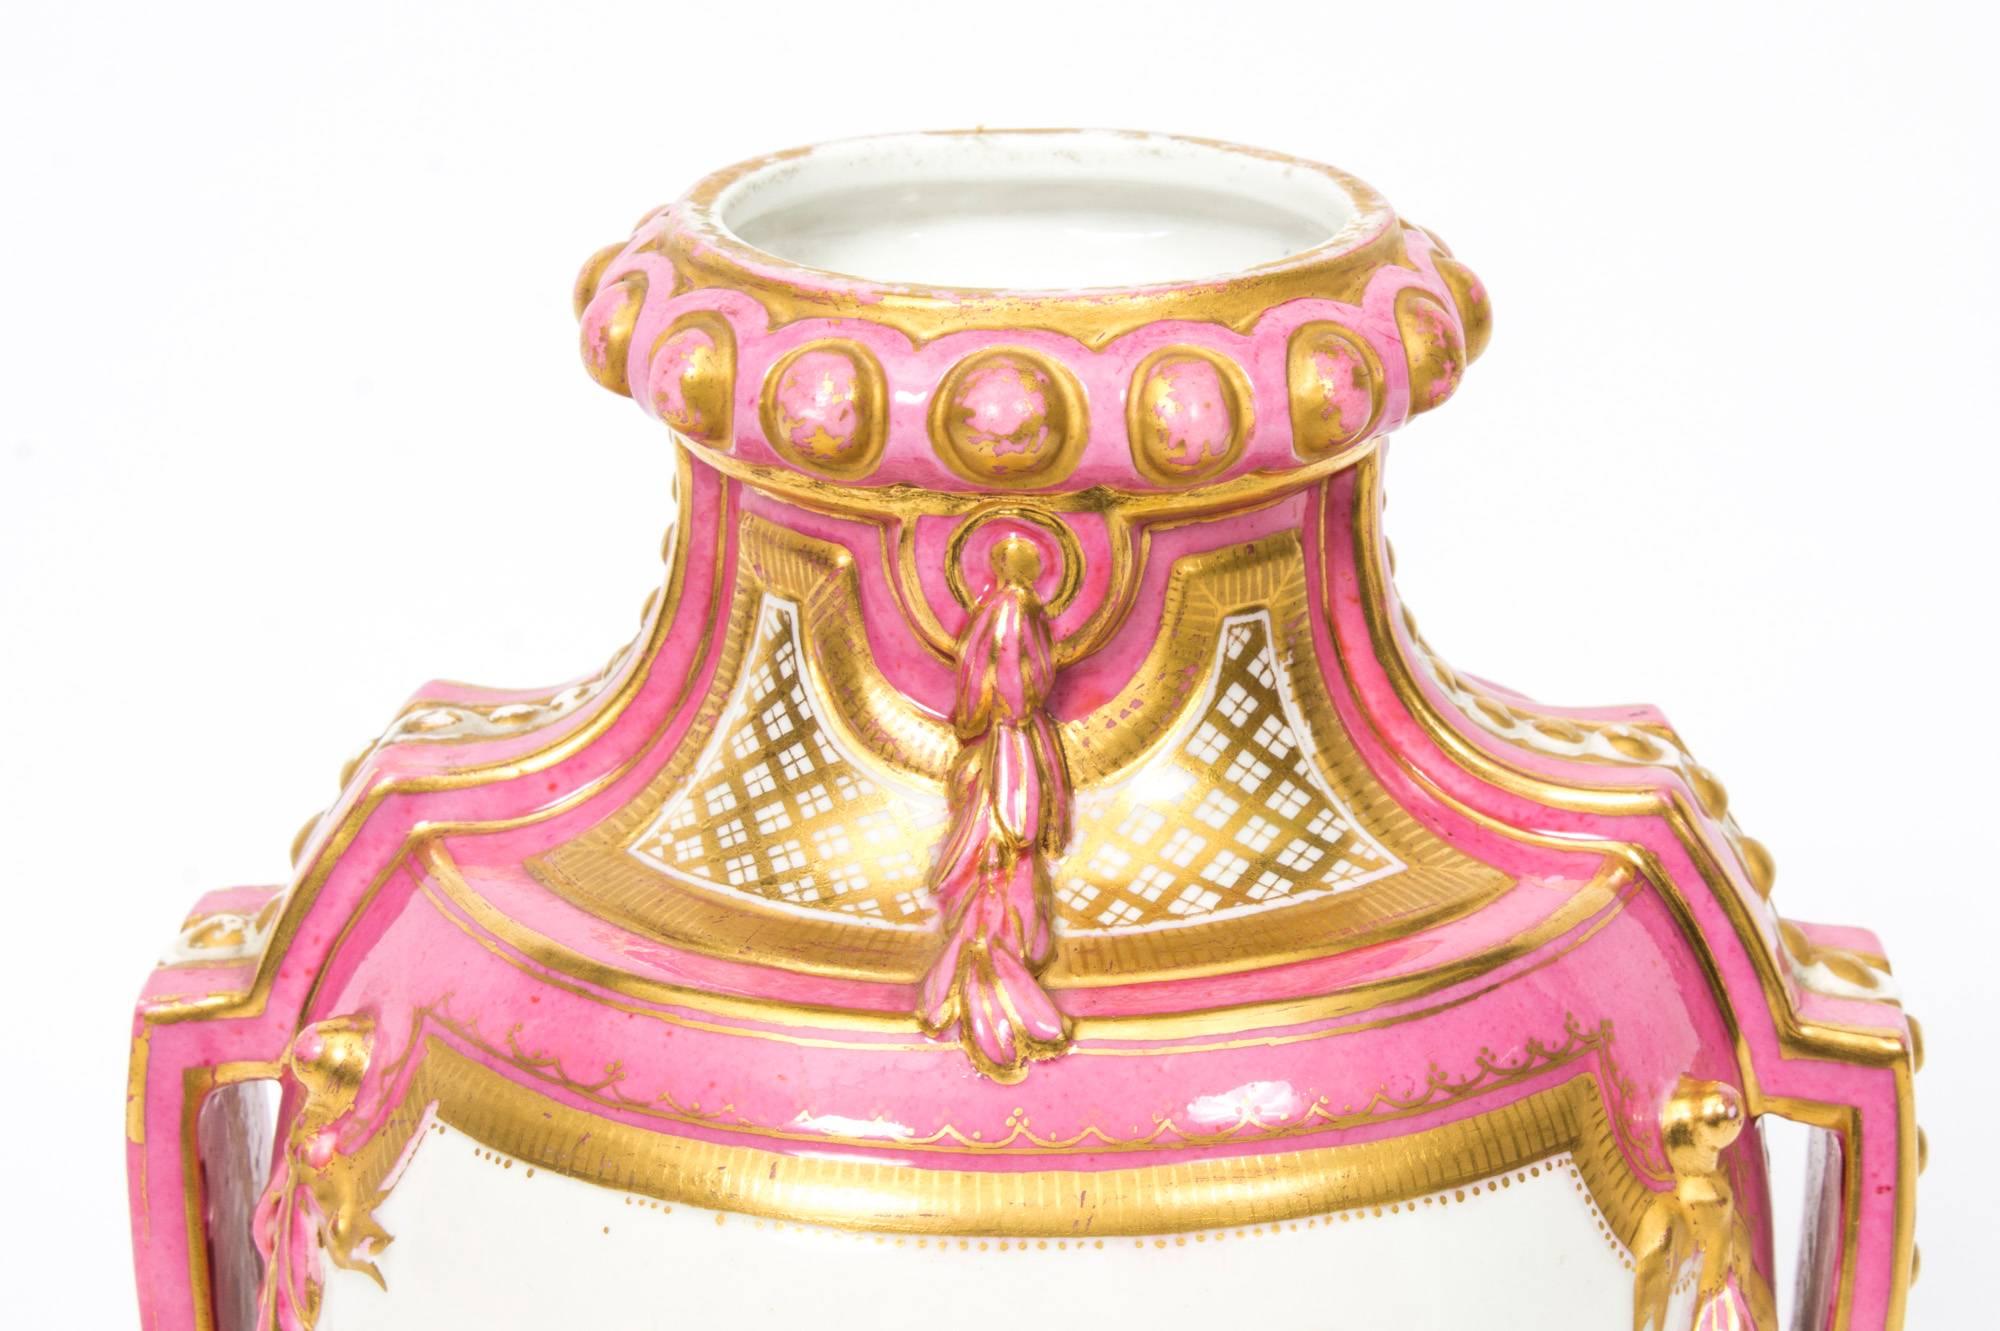 19th Century Pair of French Ormolu-Mounted Pink Sevres Vases 1